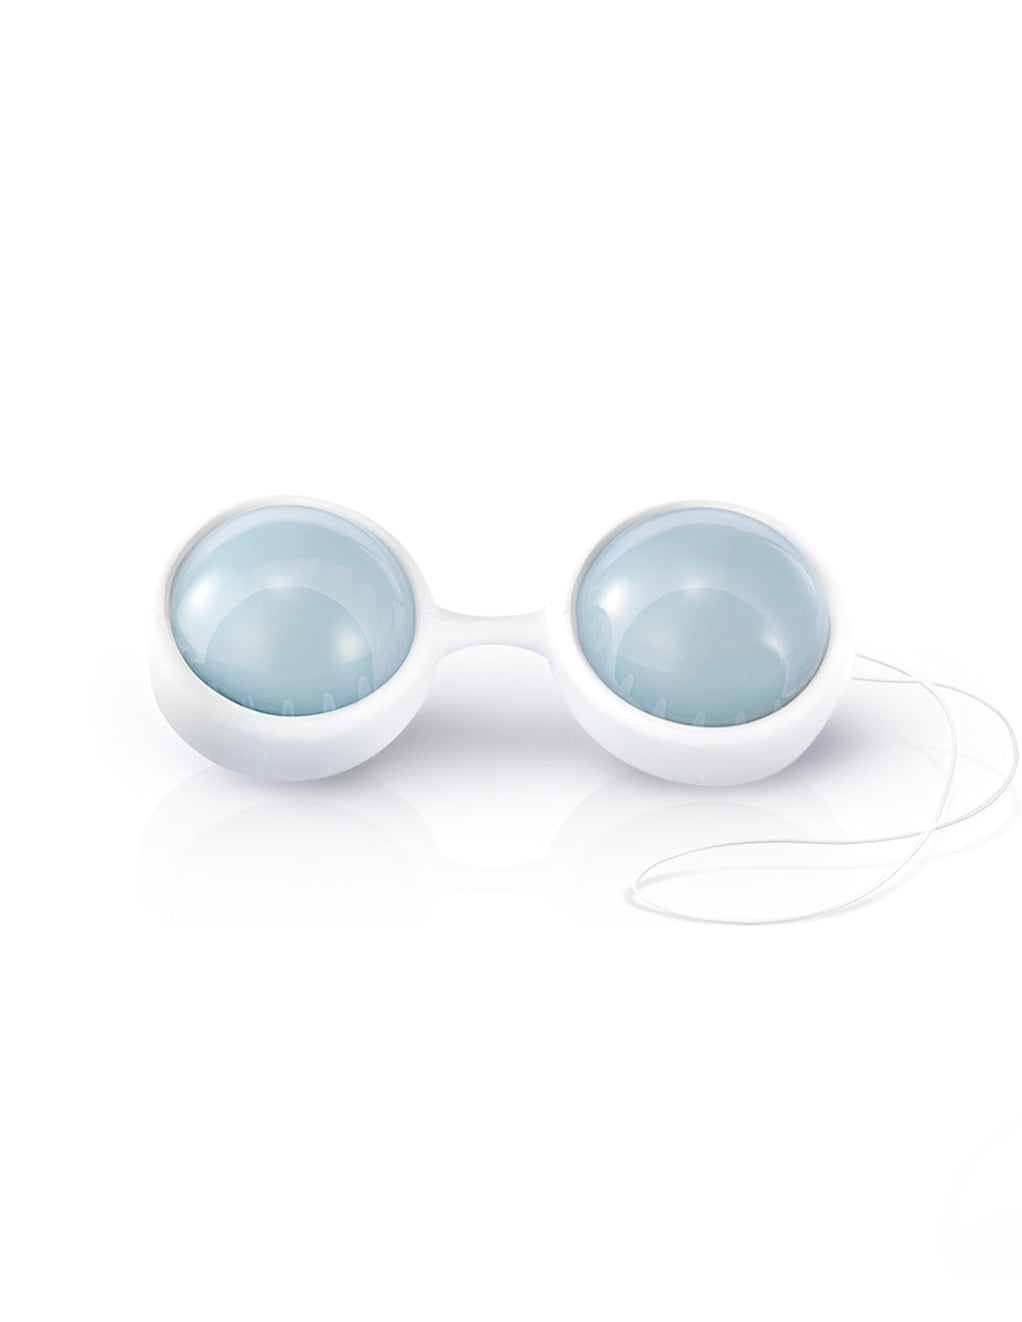 Lelo Beads Plus- Blue Beads- Front